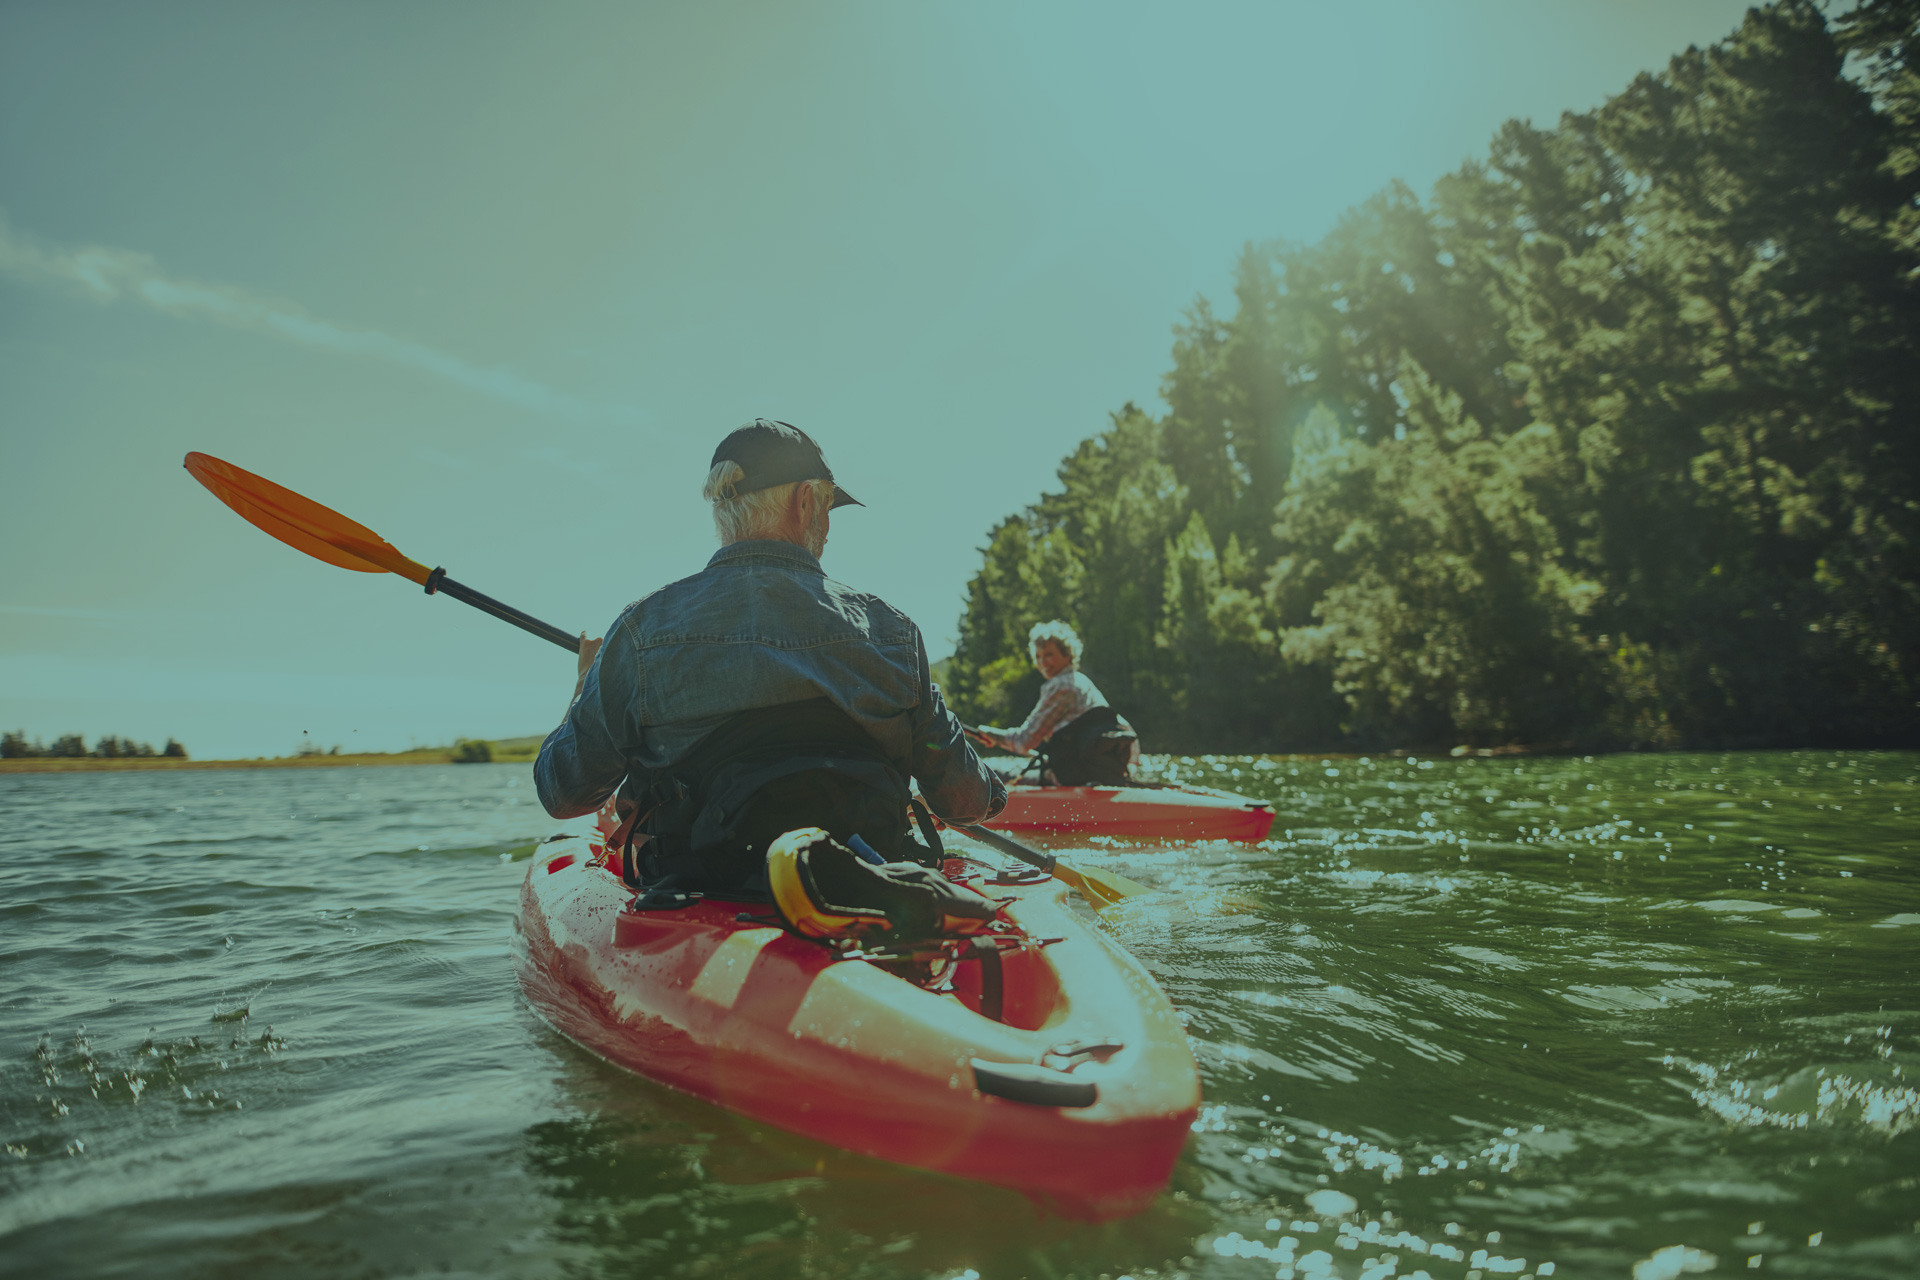 Evergreen Credit Union will help you save for your next kayak adventure.